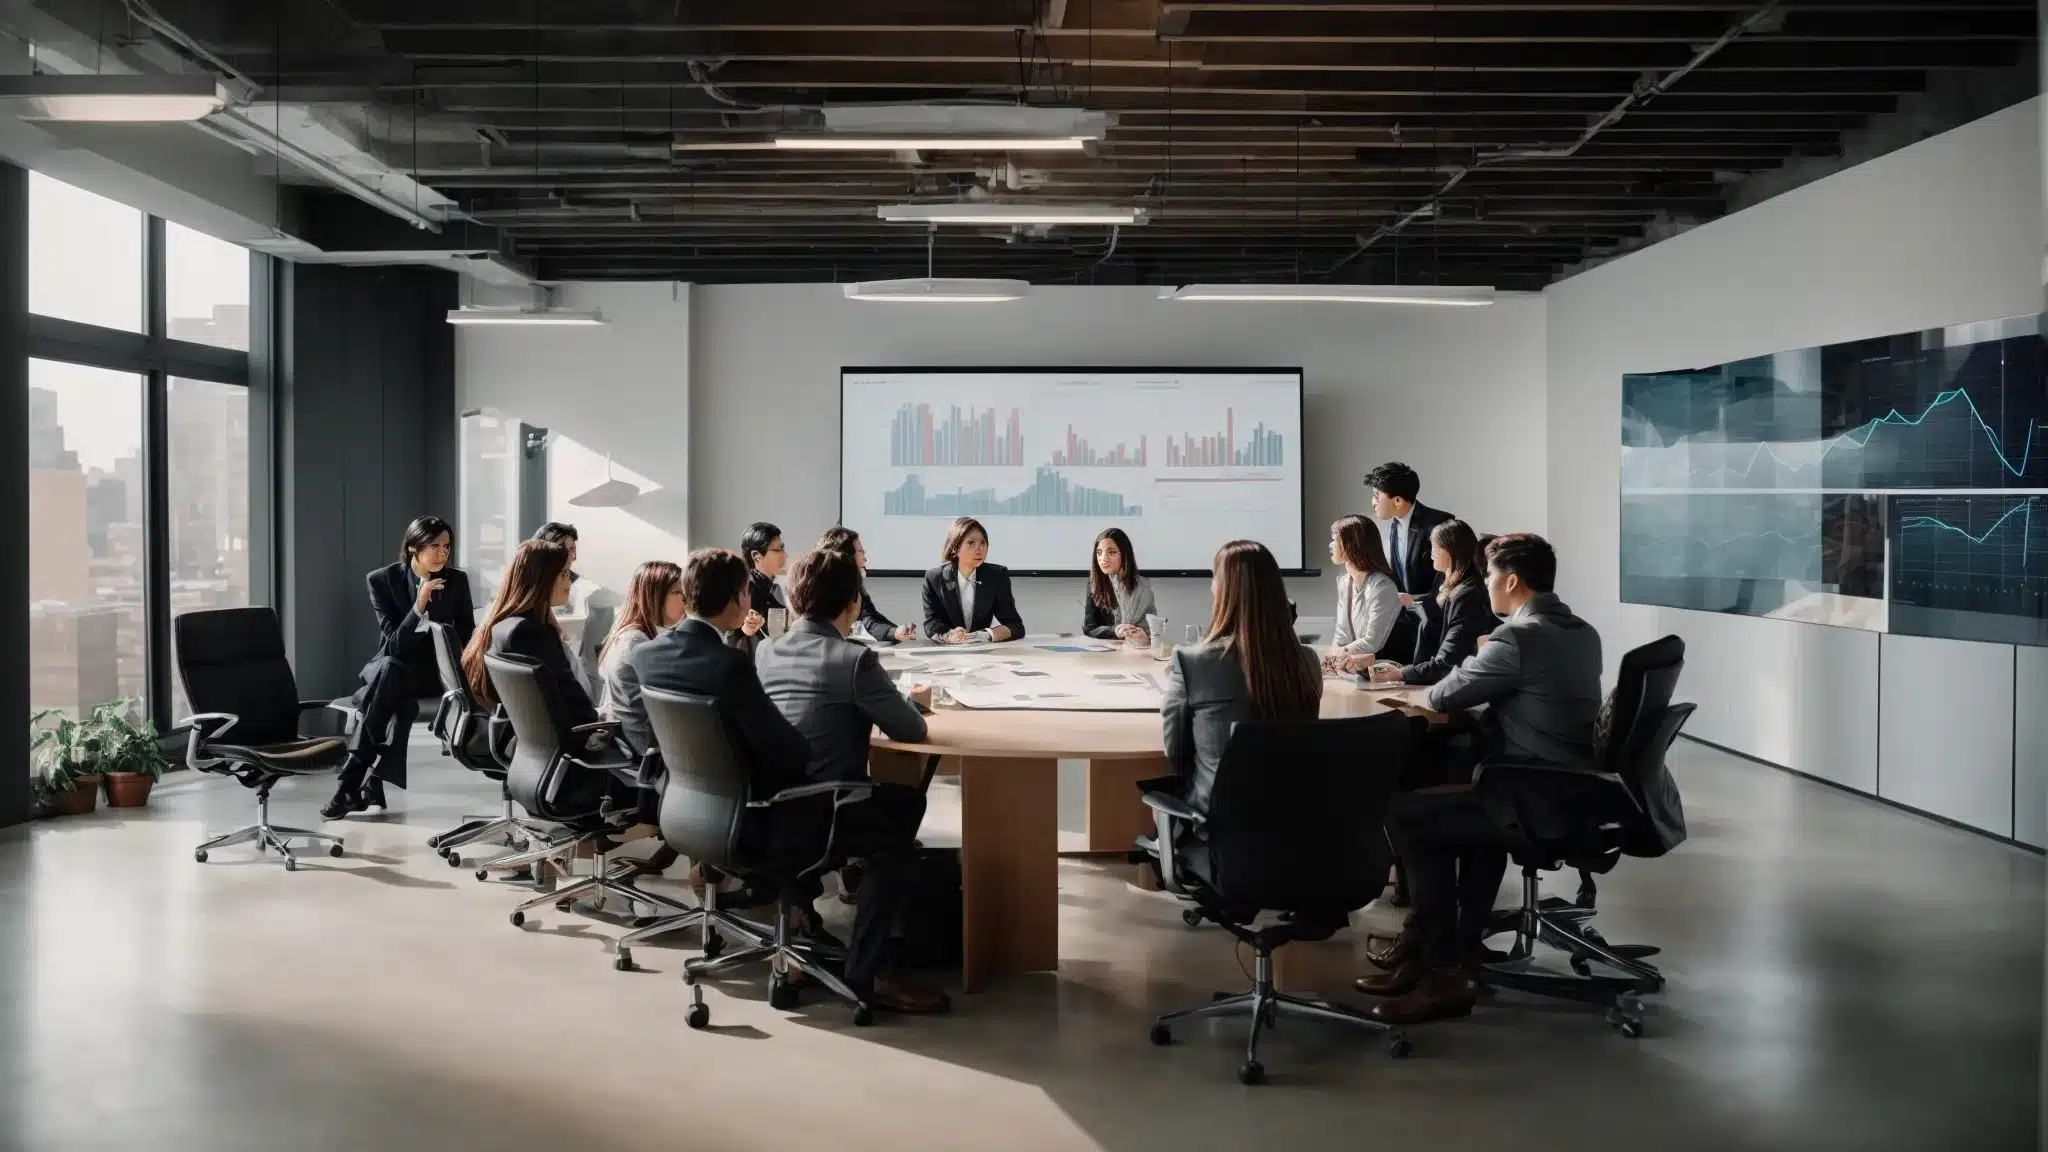 A Marketing Team Gathers Around A Bright Conference Room Table, Brainstorming Ideas With Graphs And Charts Projected On The Wall.